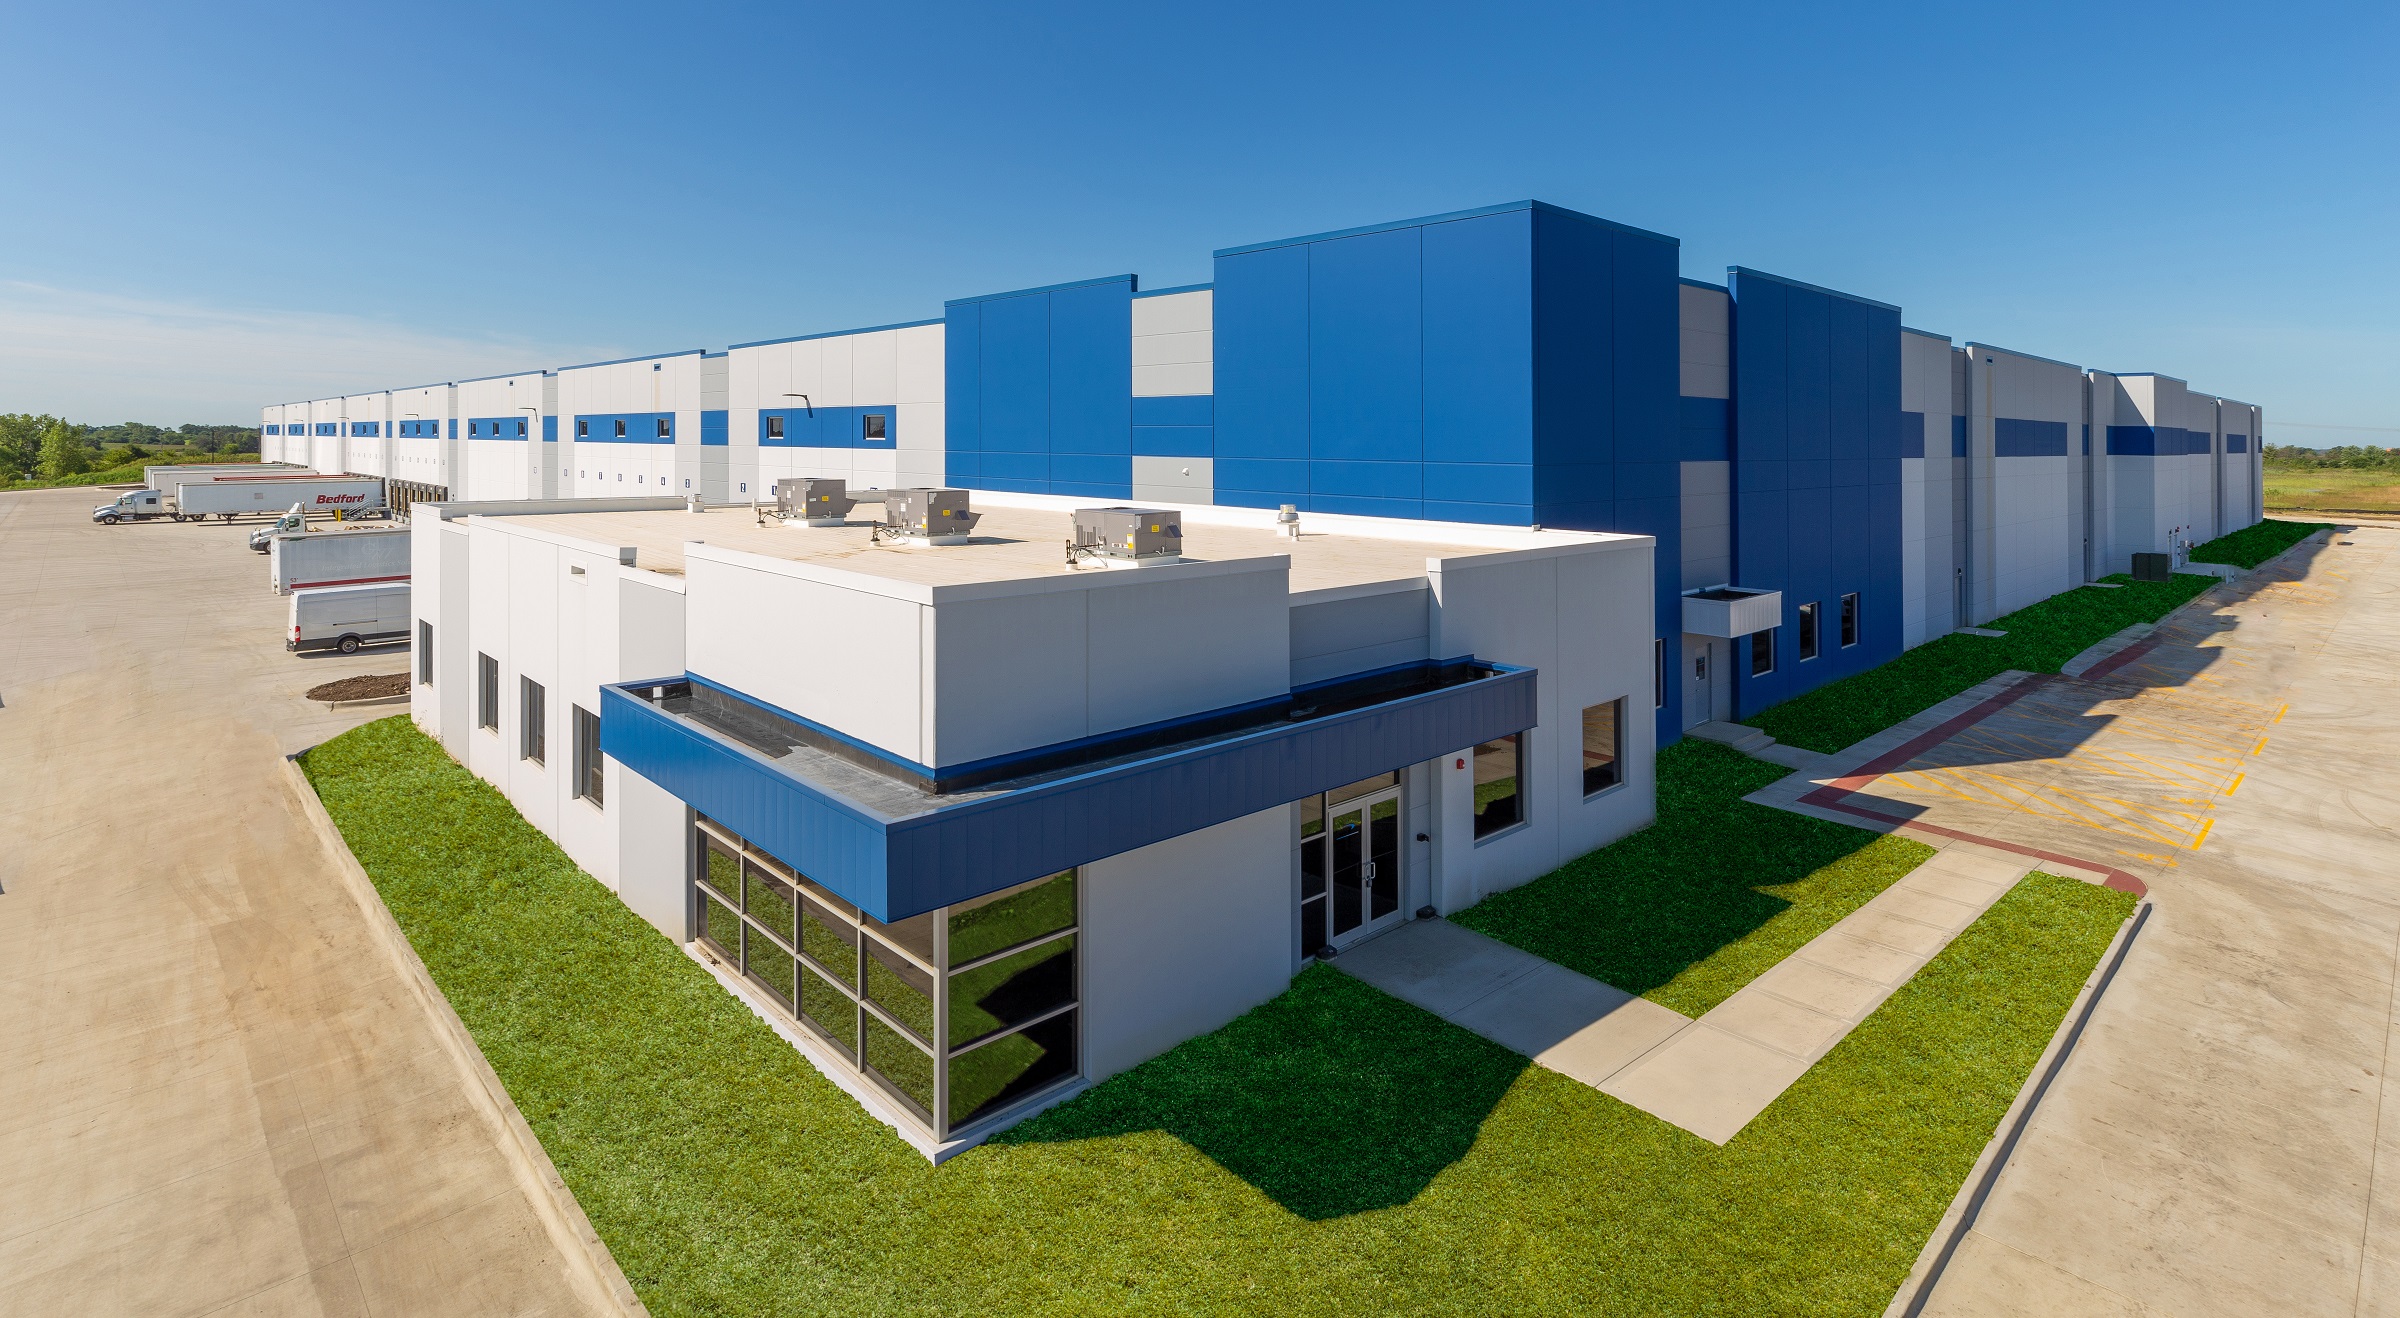 PREMIER Design + Build Group completes Midwest Warehouse project in